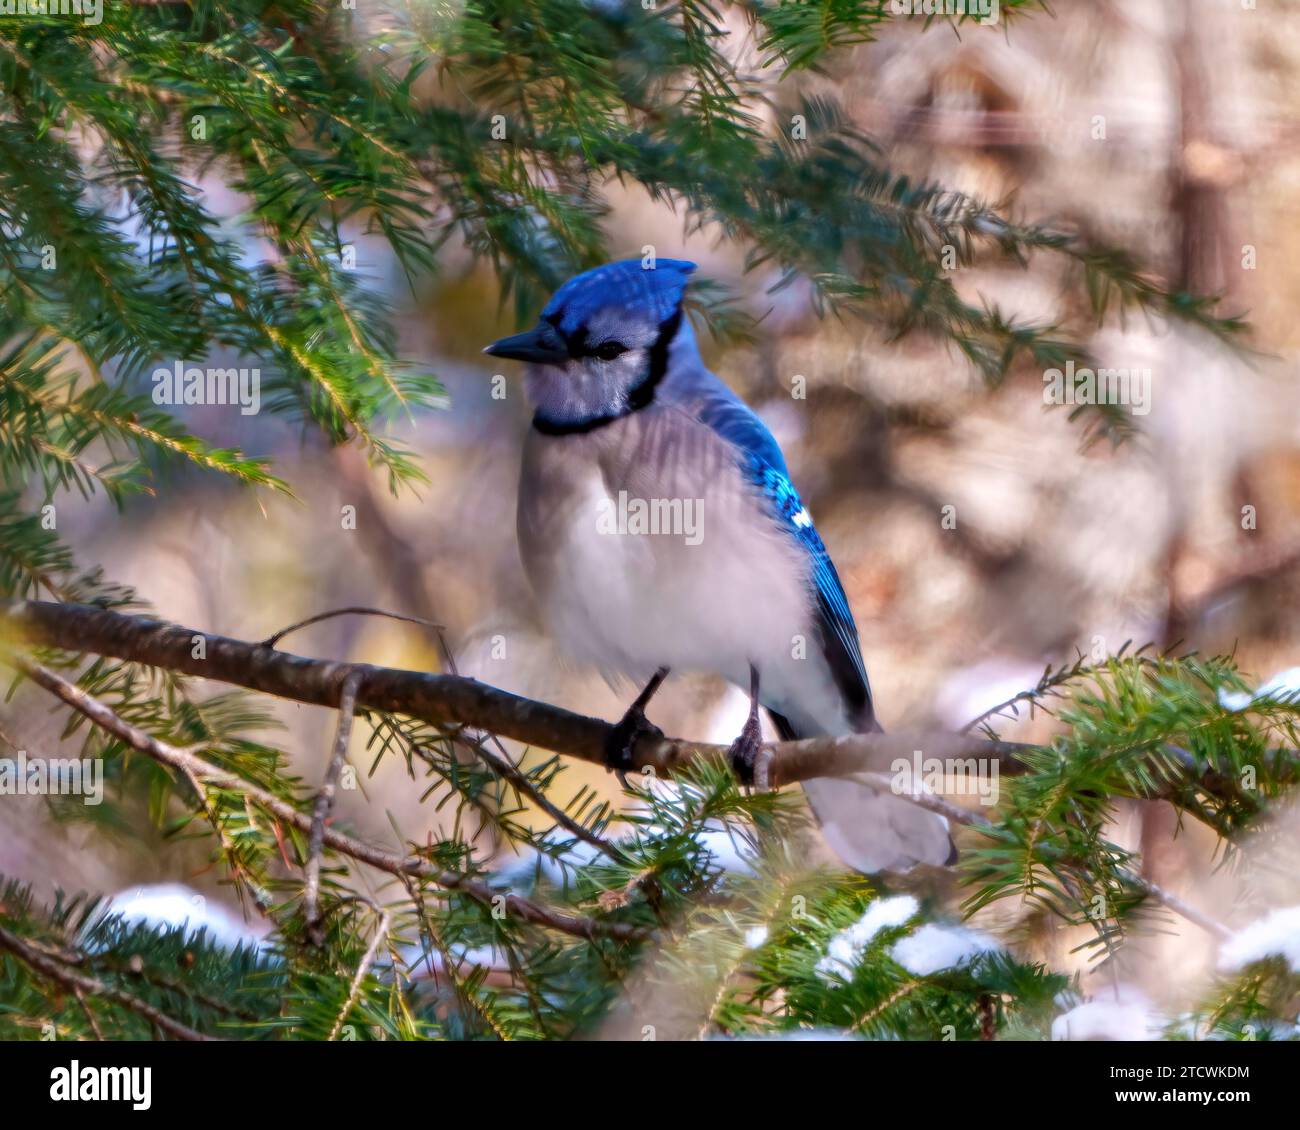 Blue Jay close-up view perched on a branch with a blur soft coniferous evergreen trees background in the forest environment and habitat surrounding. Stock Photo